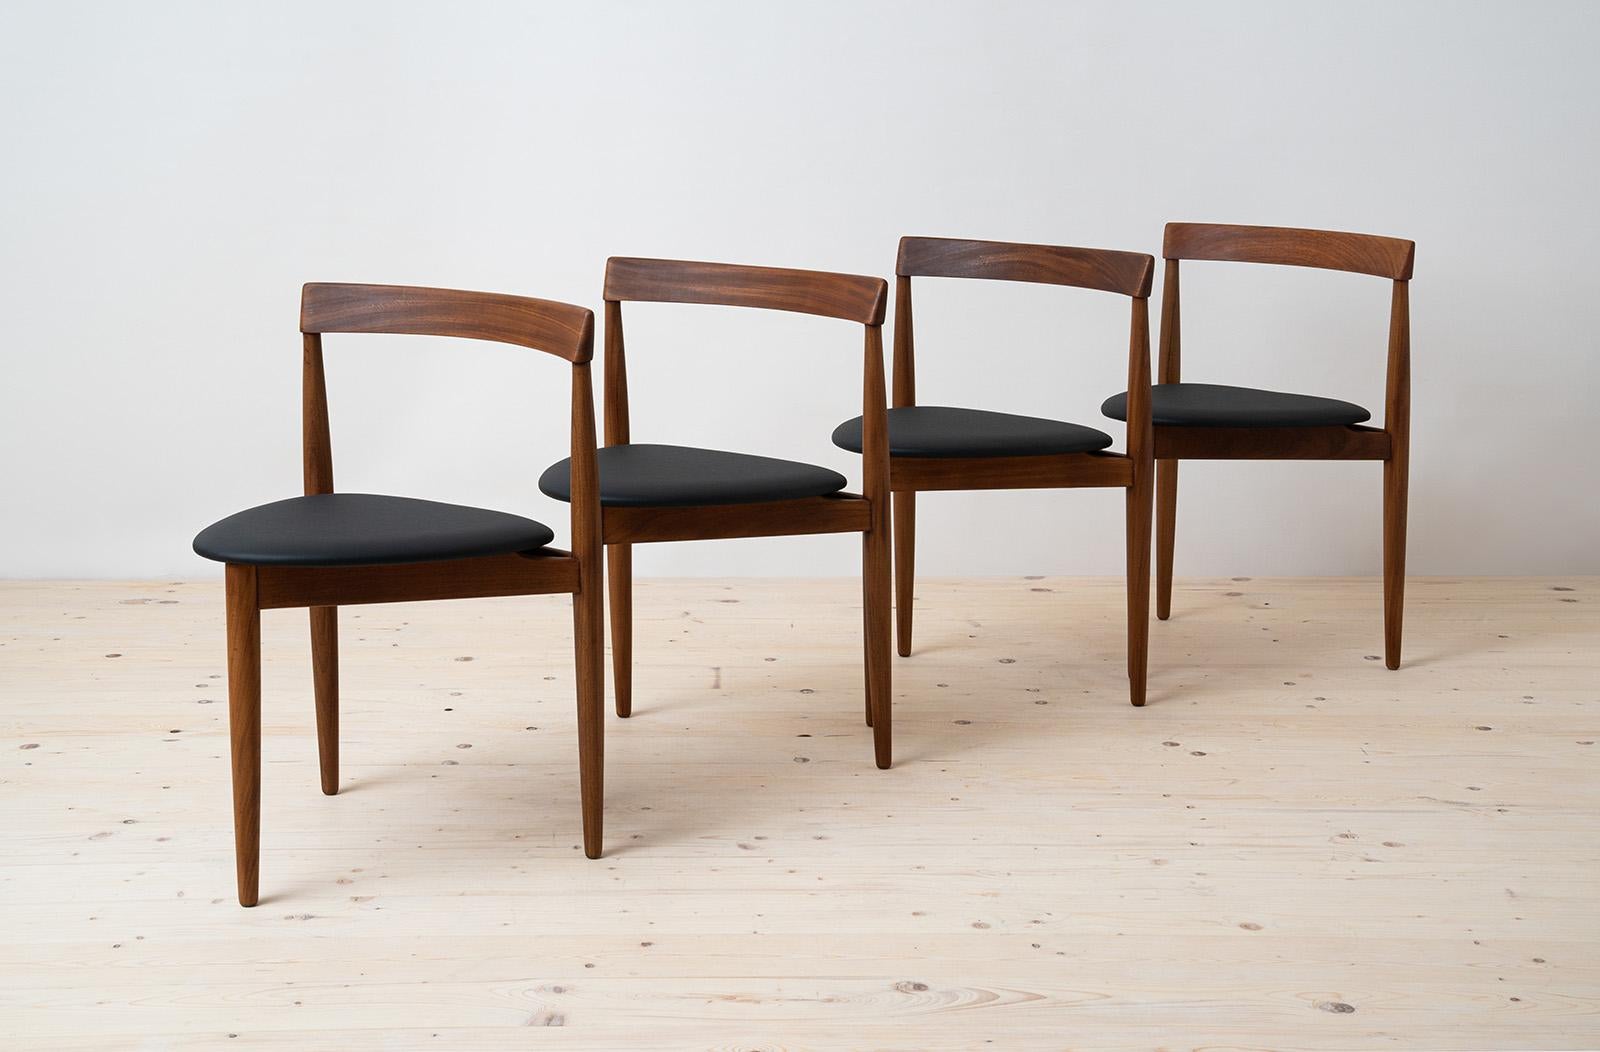 Faux Leather Teak Dining Set by Hans Olsen, 4 Chairs, Round Table, Danish Modern, 1950s